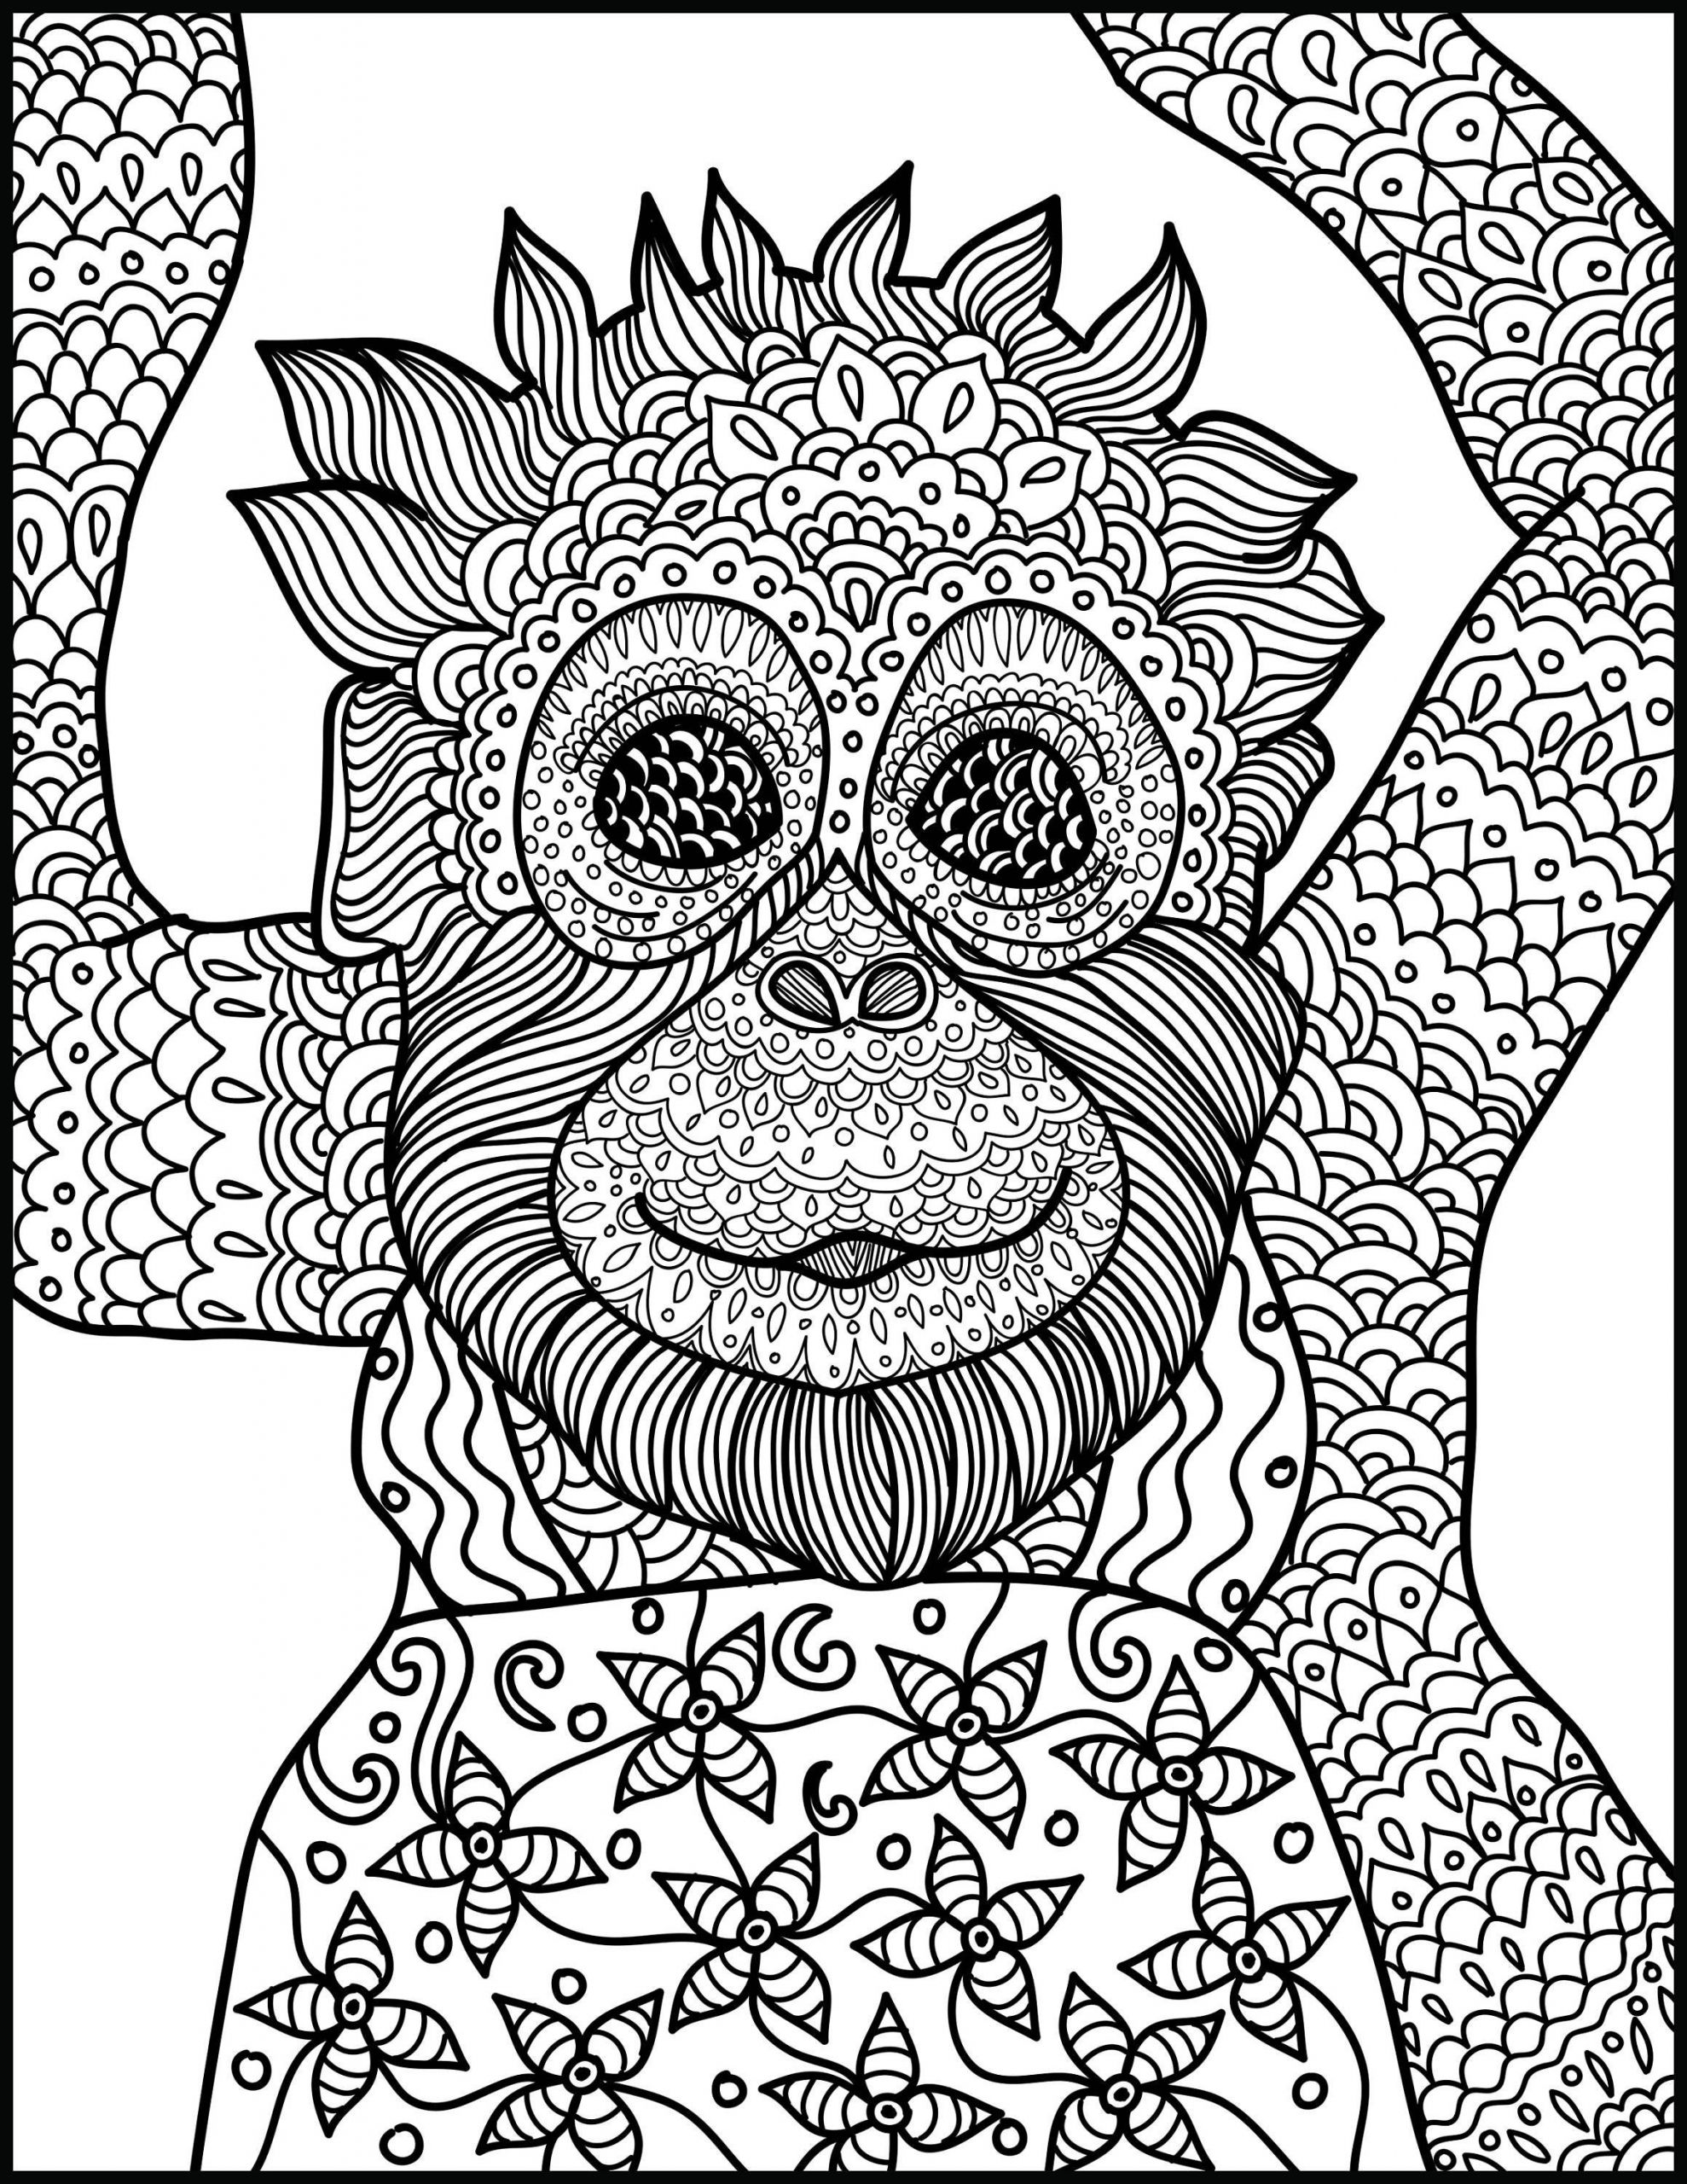 Animal Coloring Pages For Adults
 Animal Coloring Page Monkey Printable Adult Coloring Page